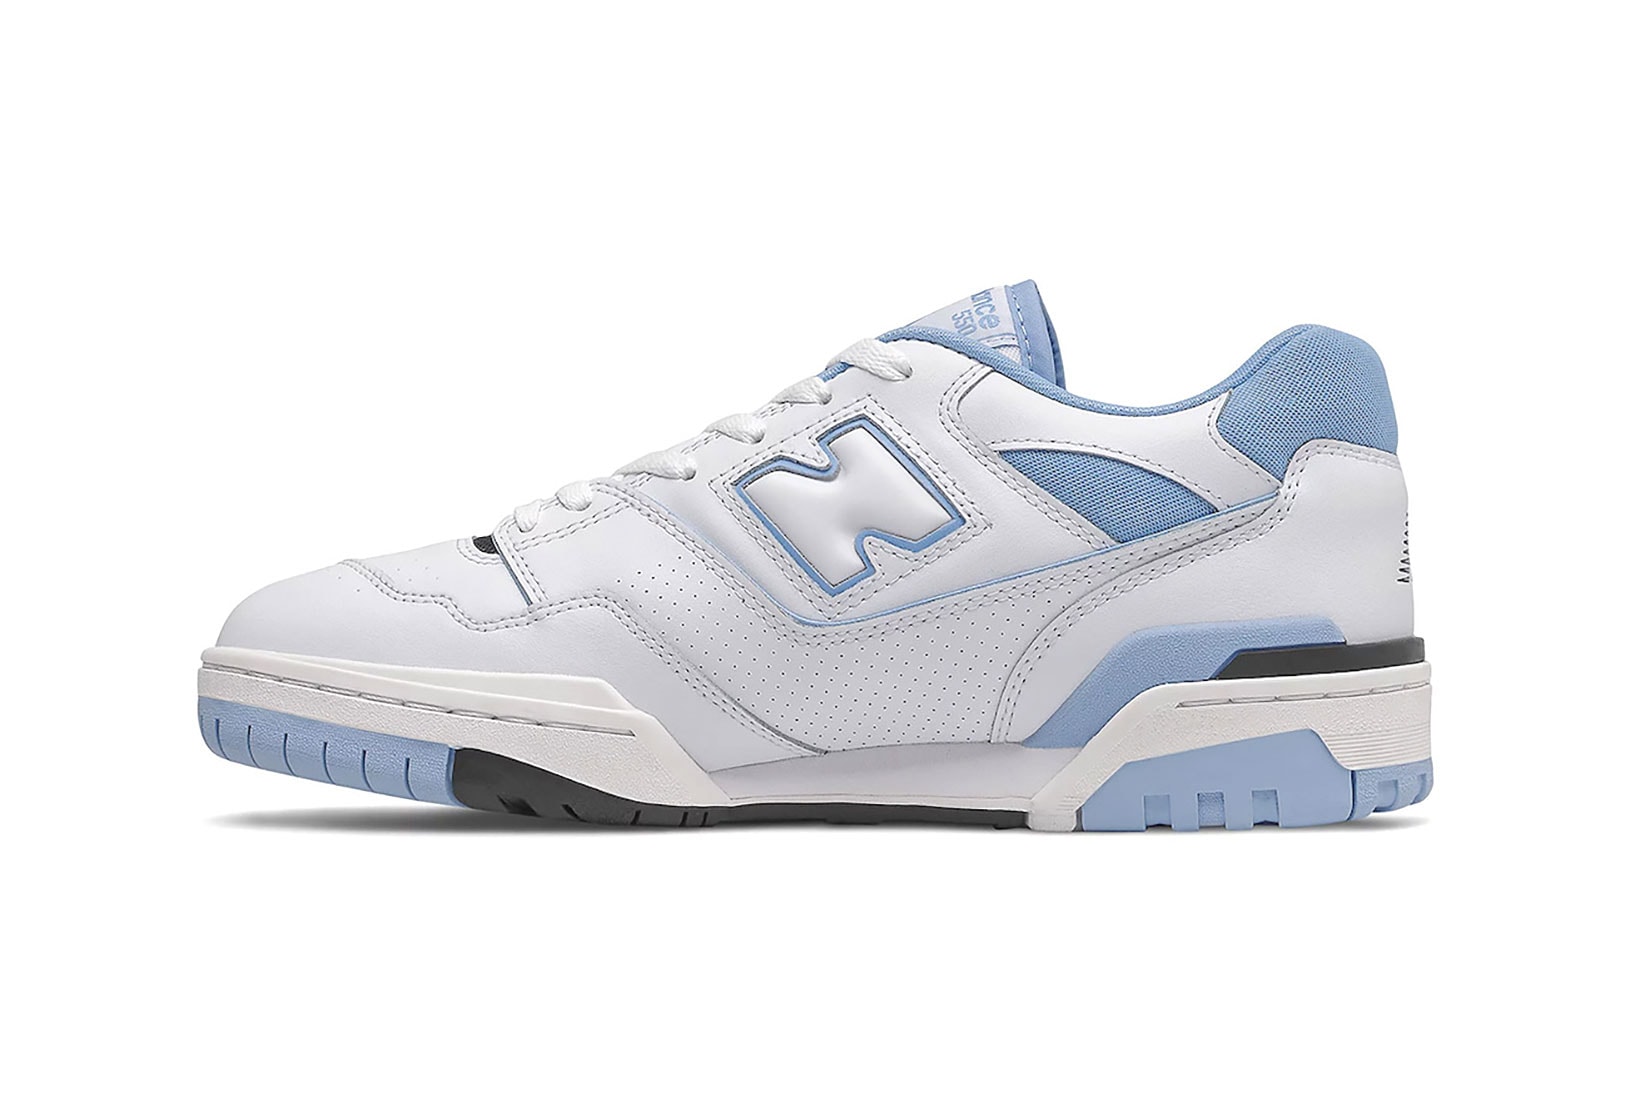 new balance nb 550 unc sneakers light pastel blue white footwear shoes kicks lateral